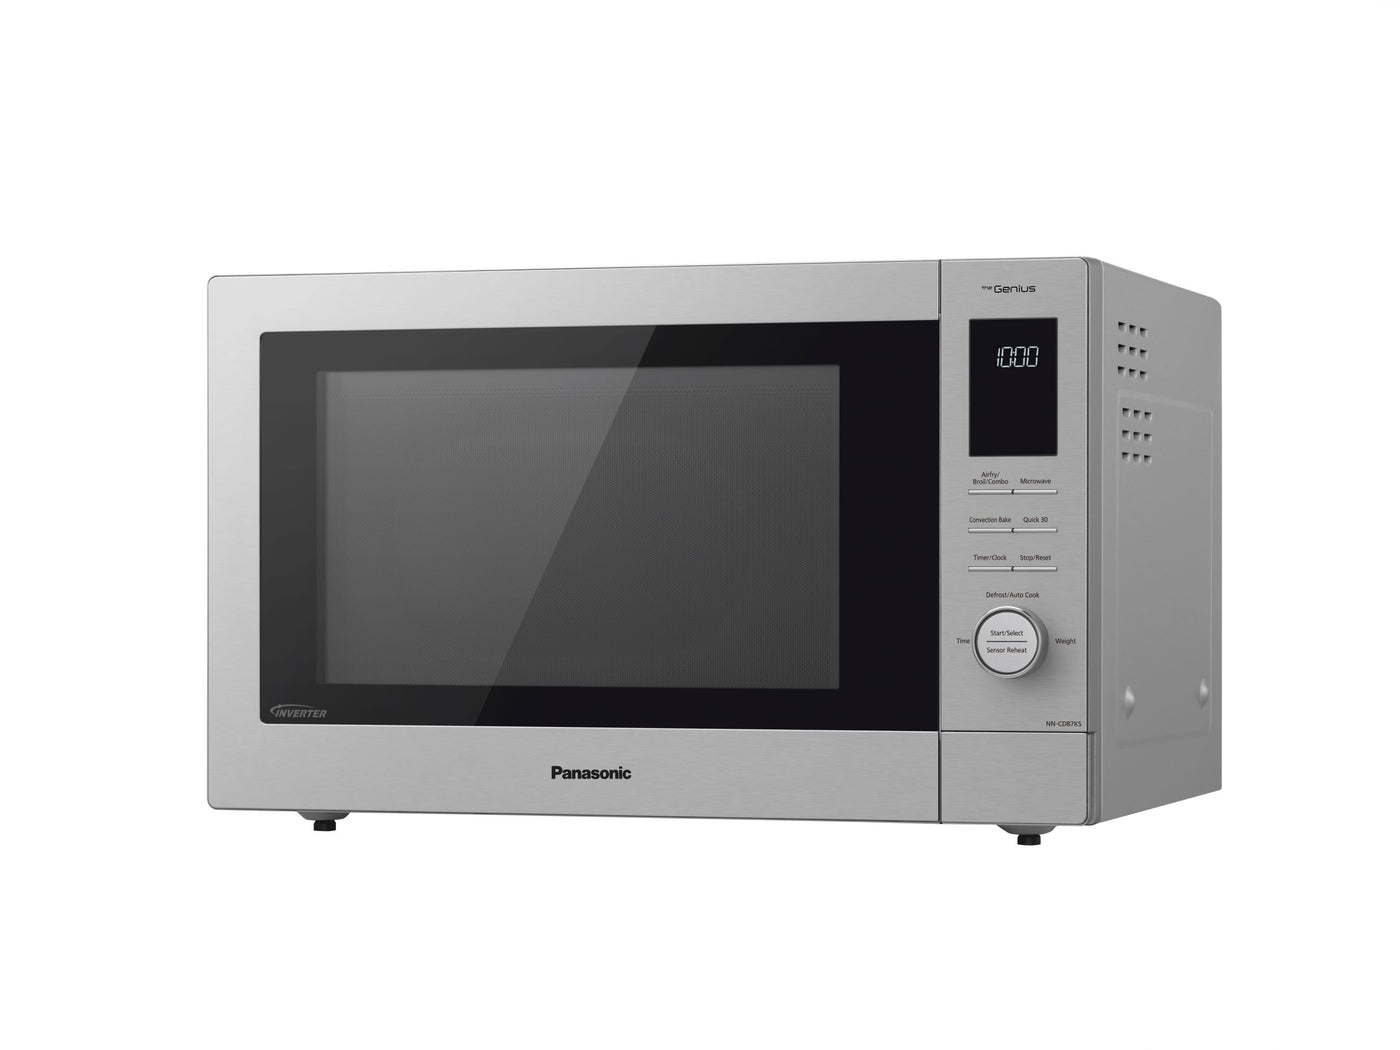 Panasonic Stainless Steel 4-in-1 Countertop Combination Microwave with Airfry (1.0 Cu.Ft.) - NNCD87KS